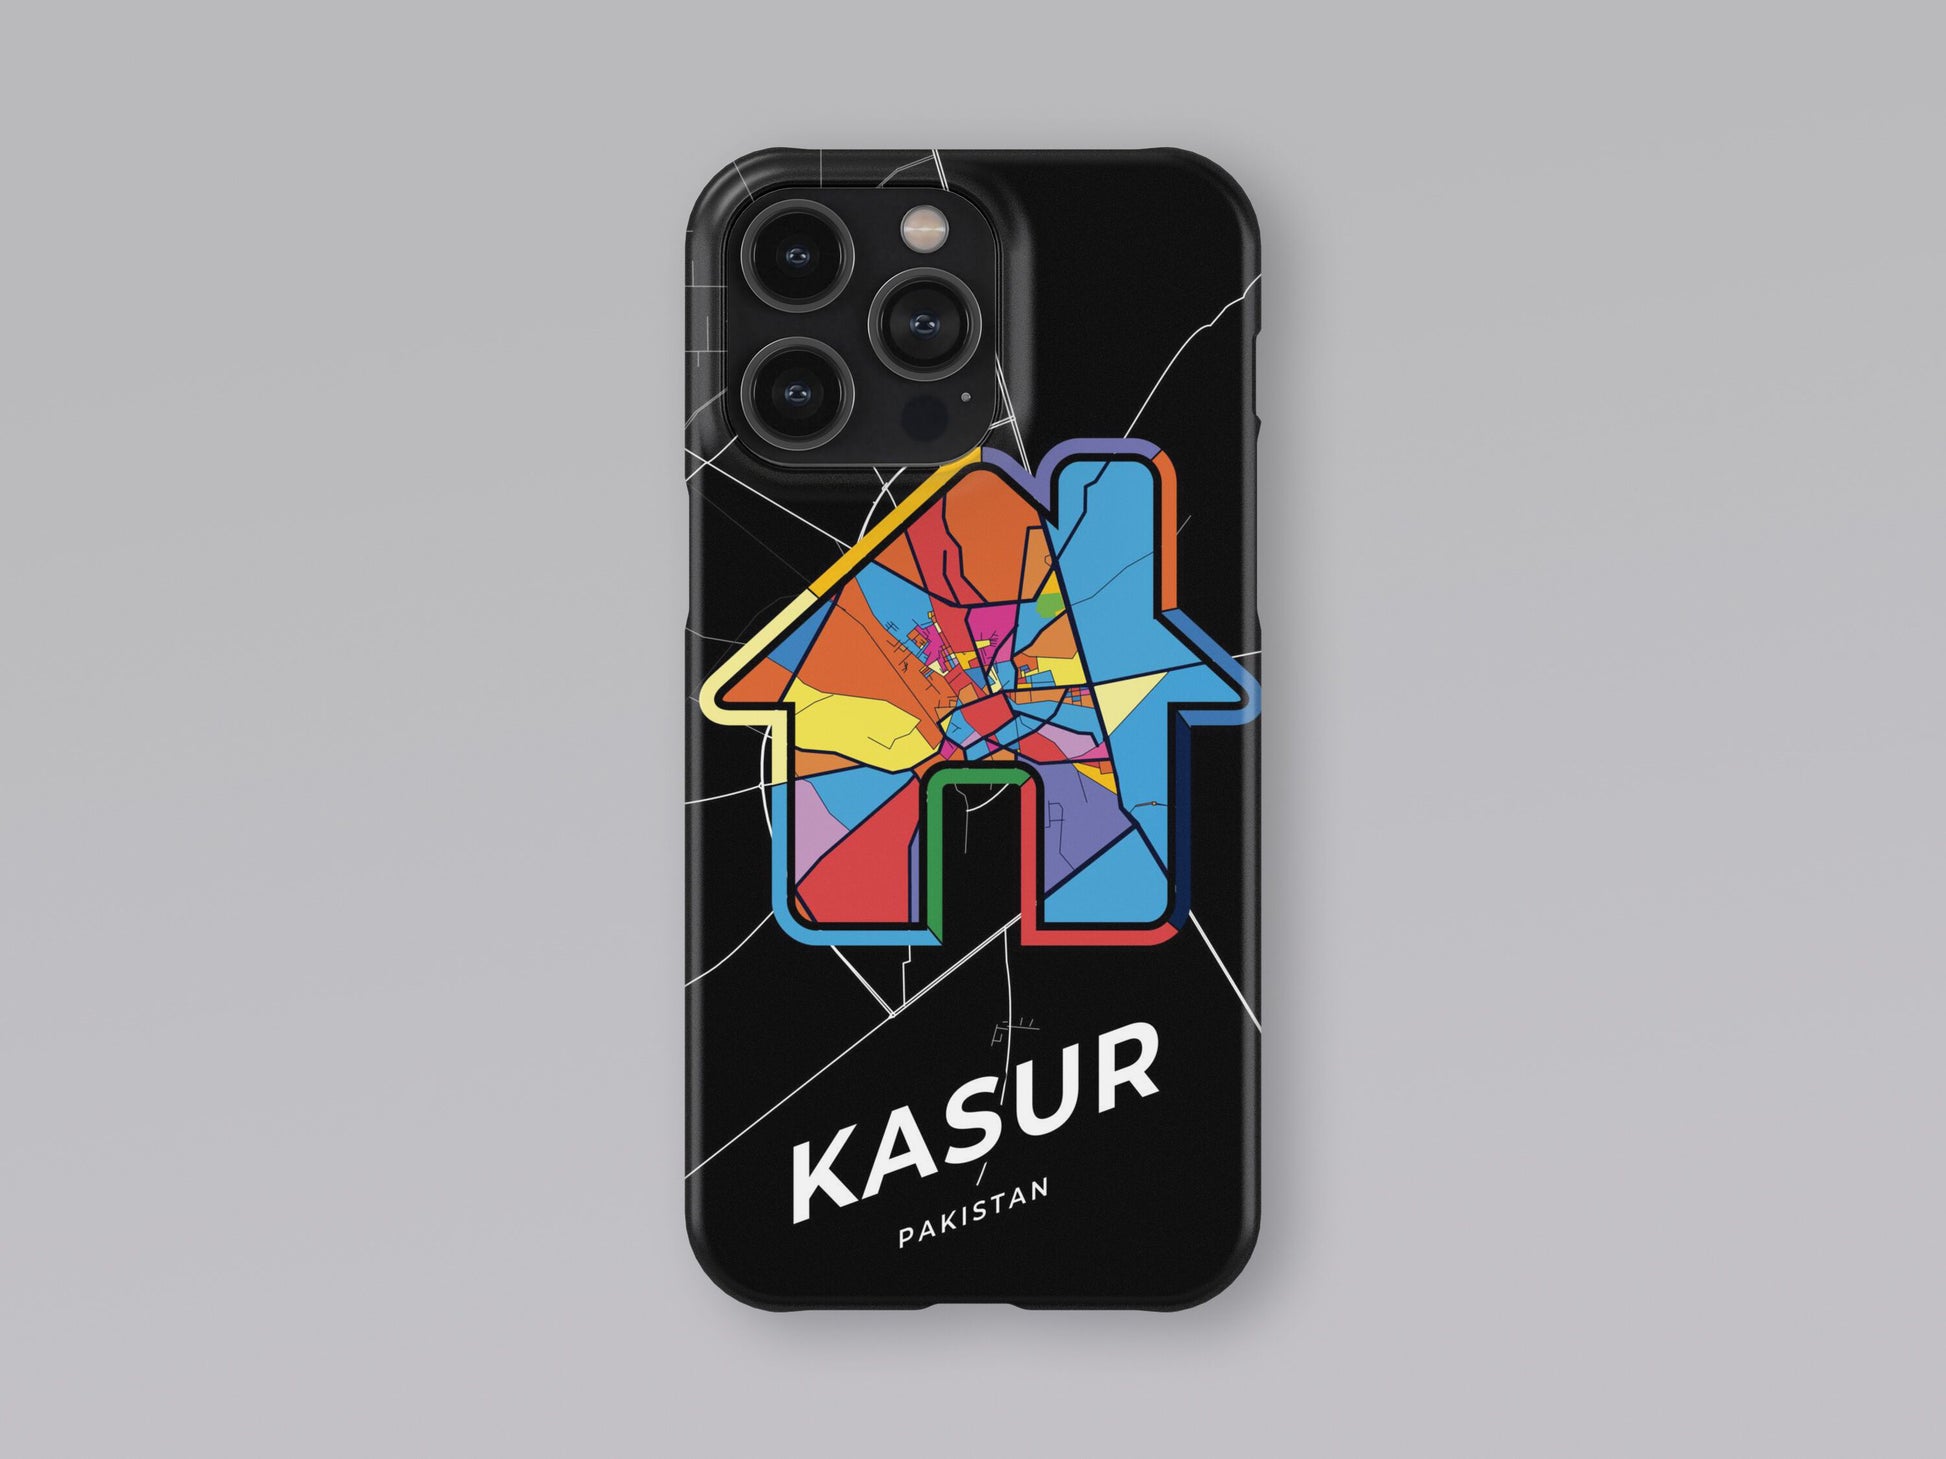 Kasur Pakistan slim phone case with colorful icon. Birthday, wedding or housewarming gift. Couple match cases. 3